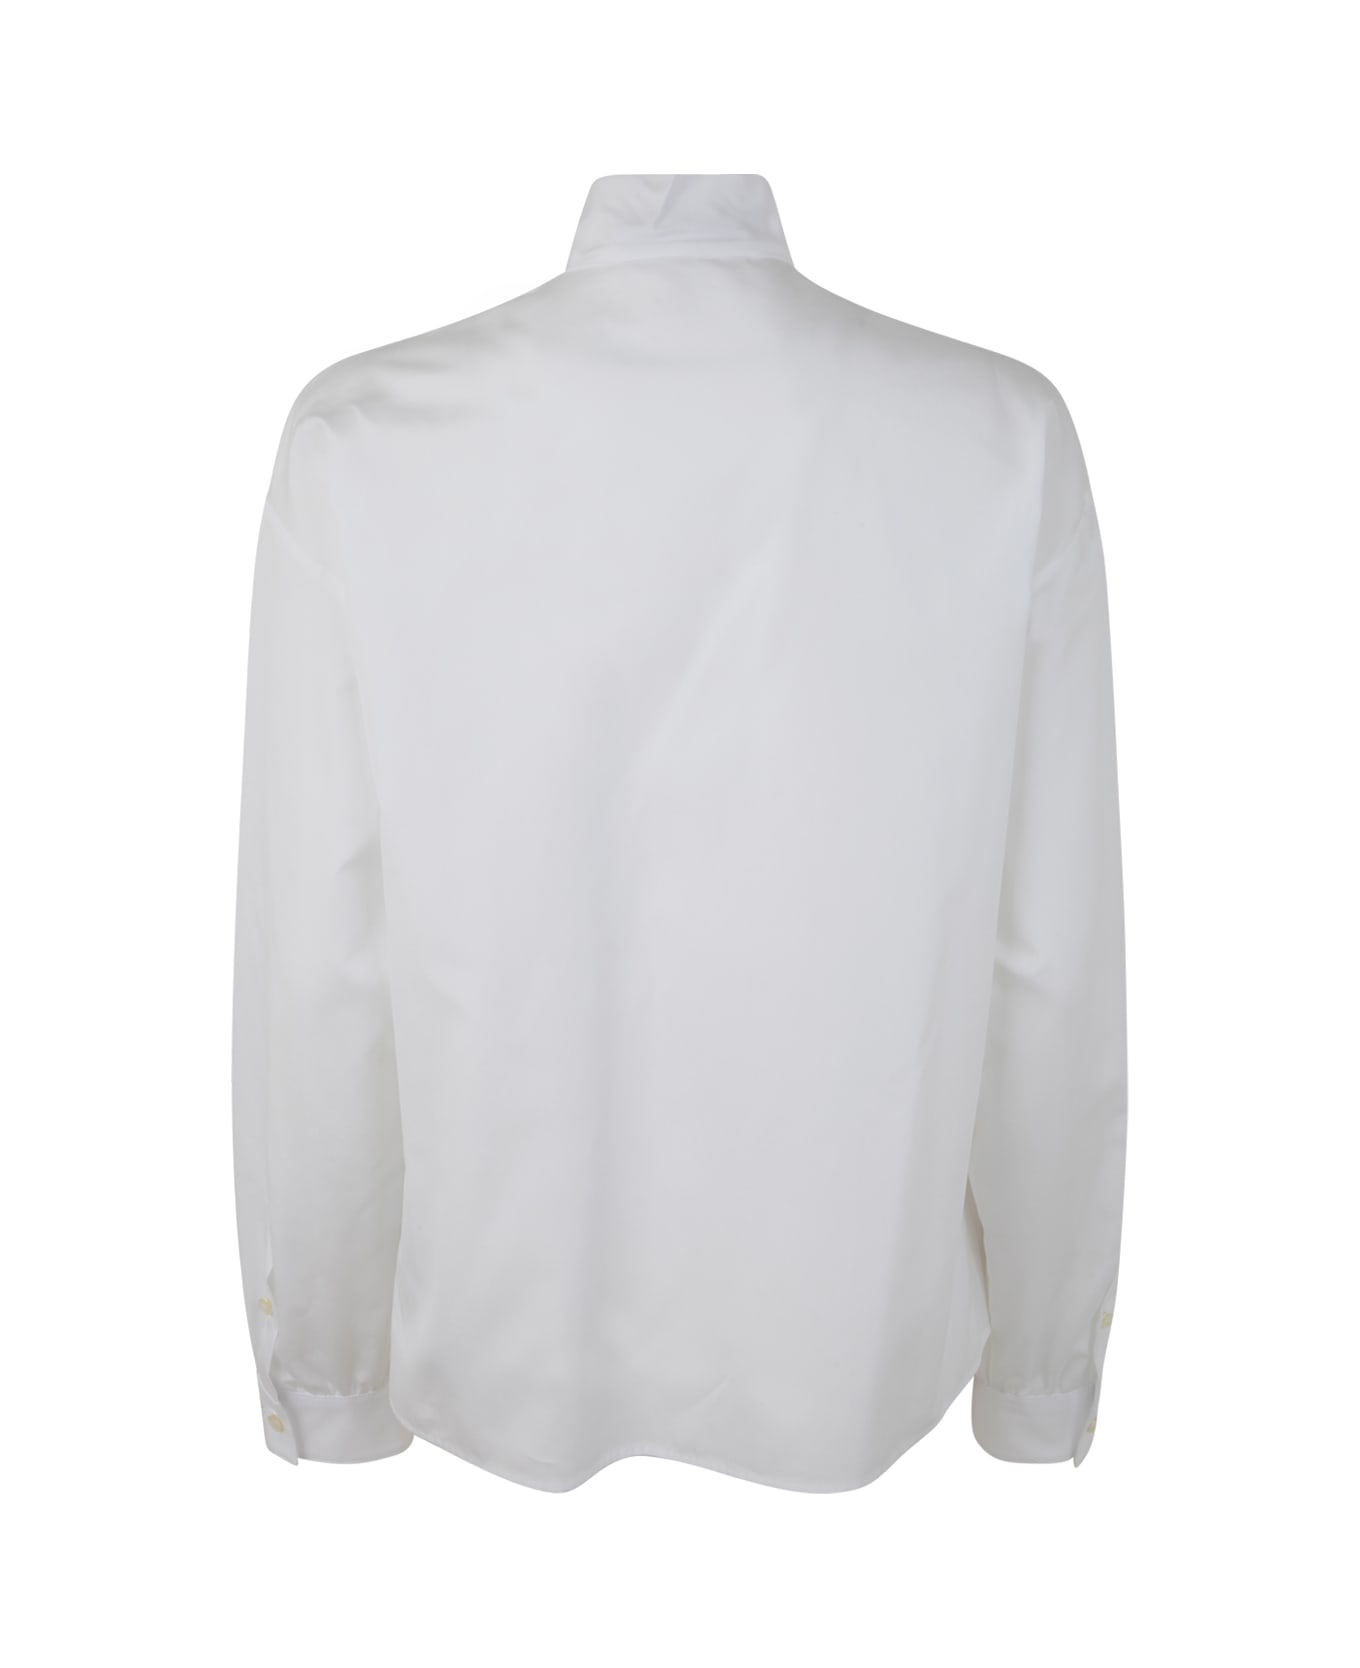 Dsquared2 Knotted Collar Shirt - White シャツ